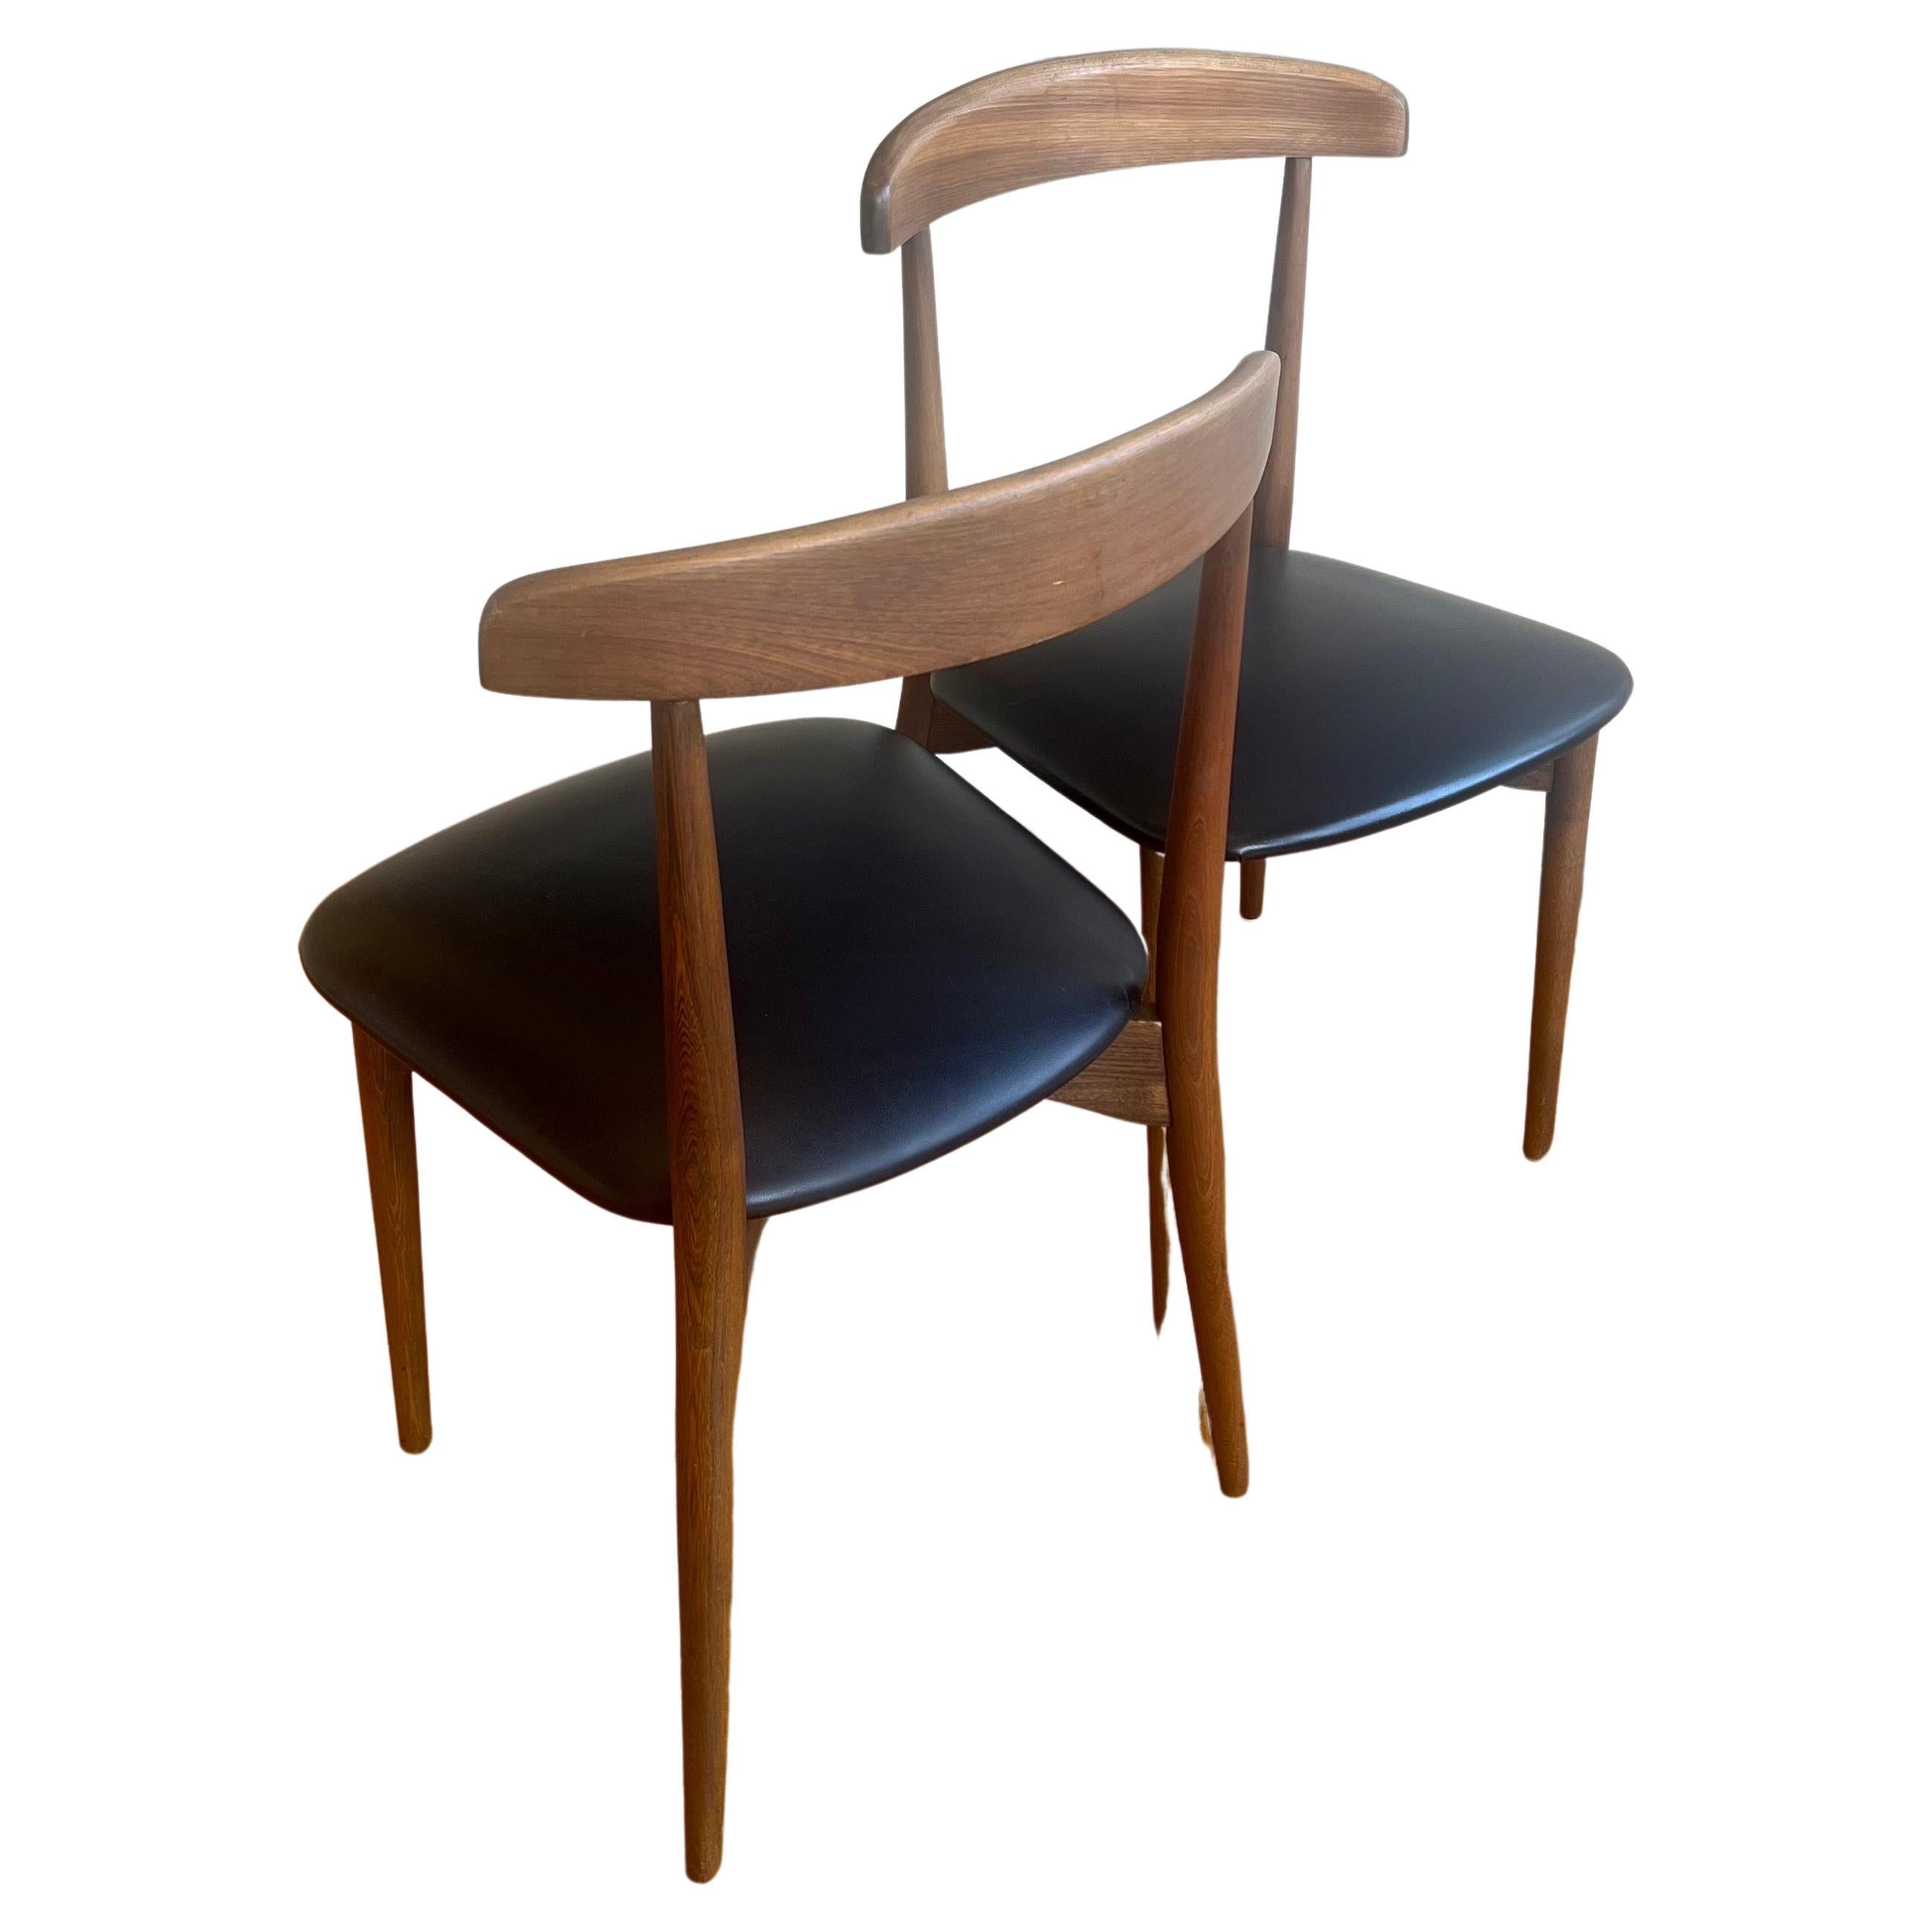 American Mid century Modern Walnut Desk/Dining Chairs 3 Available For Sale